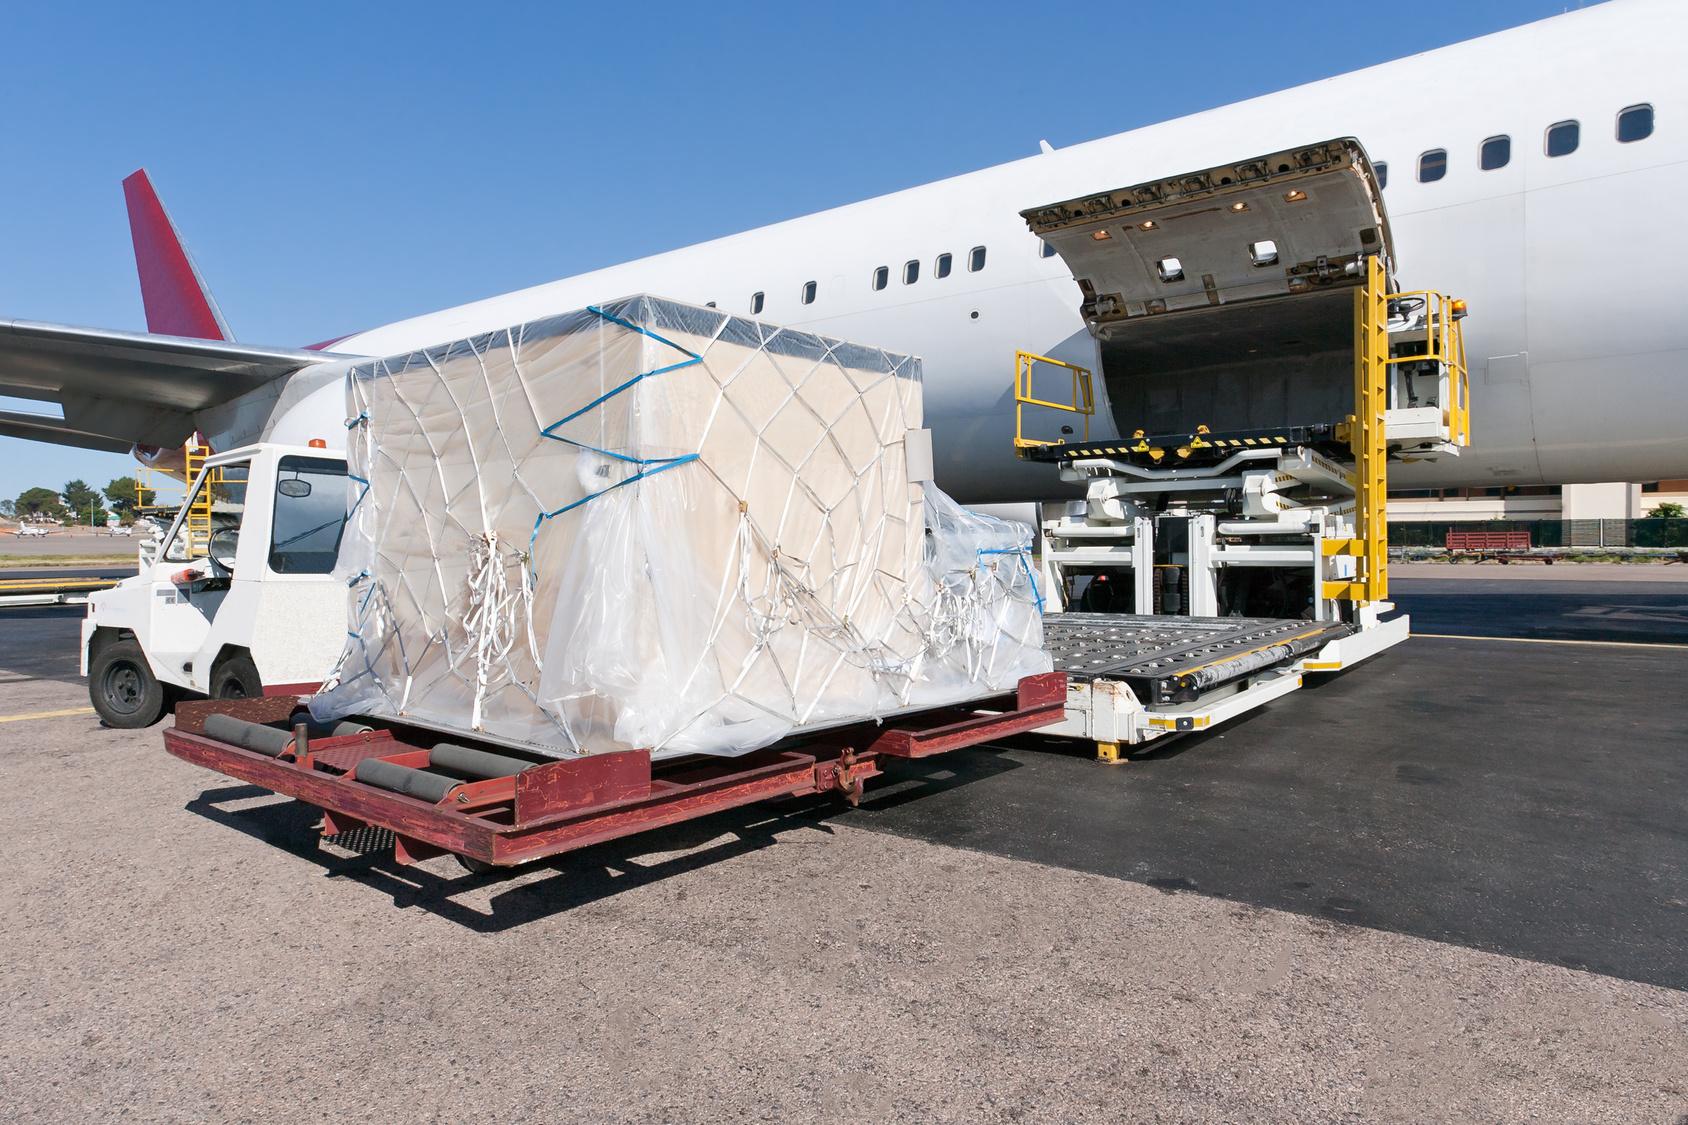 Consignments via the cold chain, distribution of pharmaceutical products via the cold chain, insulated shipping packaging solutions for transporting pharmaceutical products